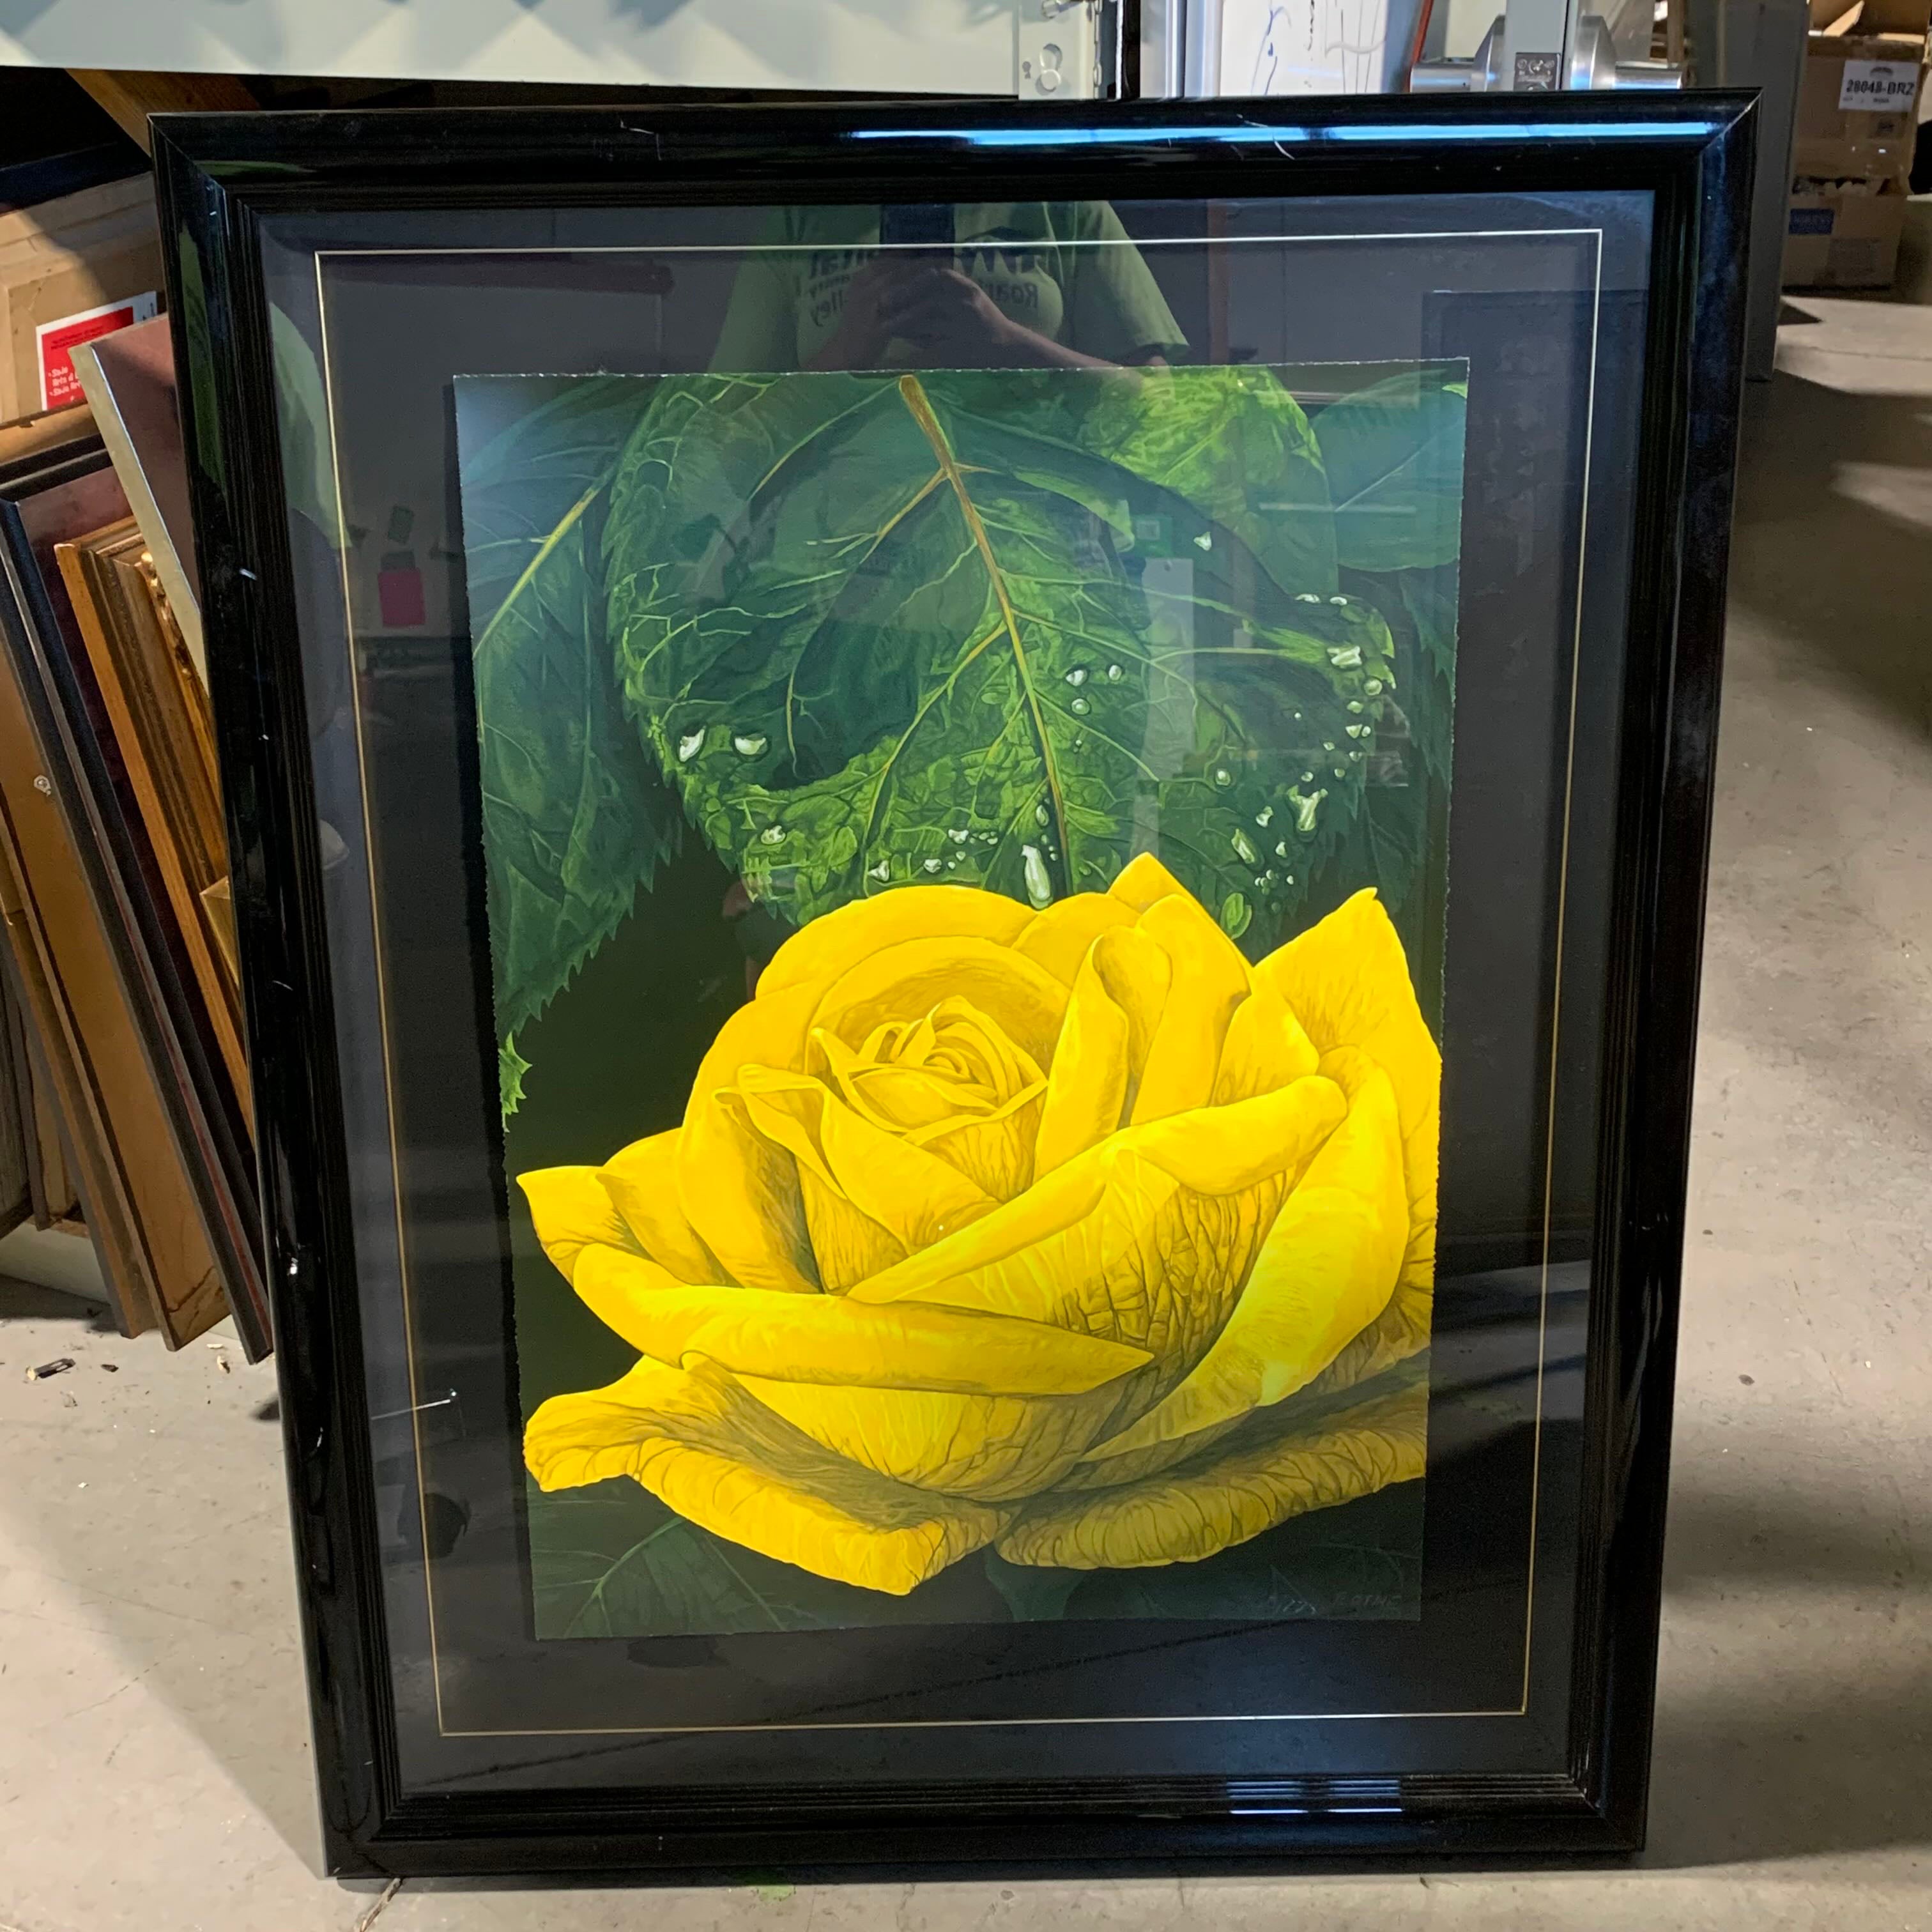 34"x 43" Yellow Rose by G.H. Rothe Framed and Signed Print 62/175